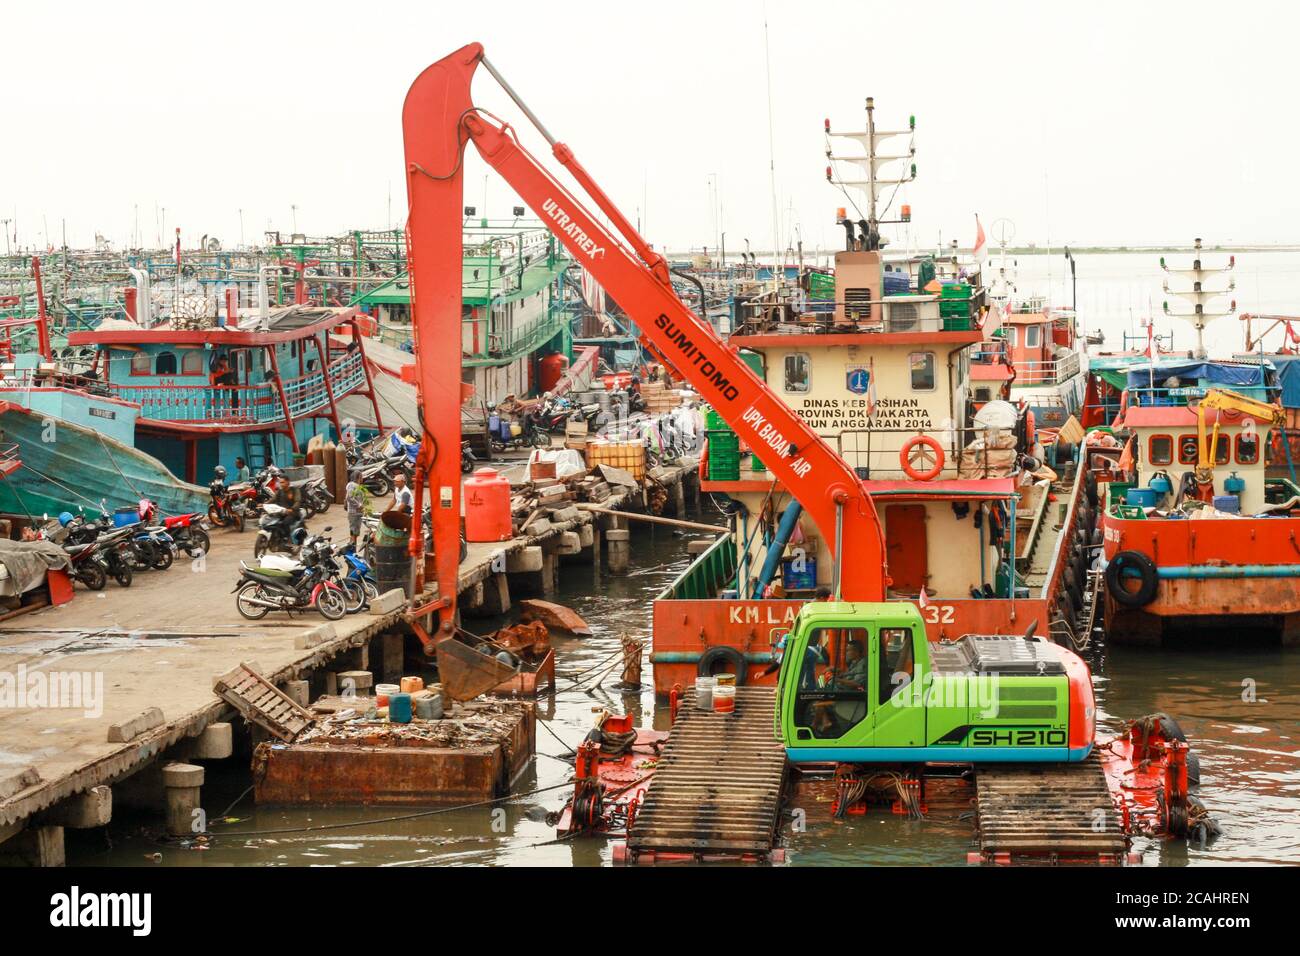 Jakarta, Indonesia - April 21, 2019: An excavator operated to clean up garbage in Muara Angke Port, North Jakarta. Stock Photo